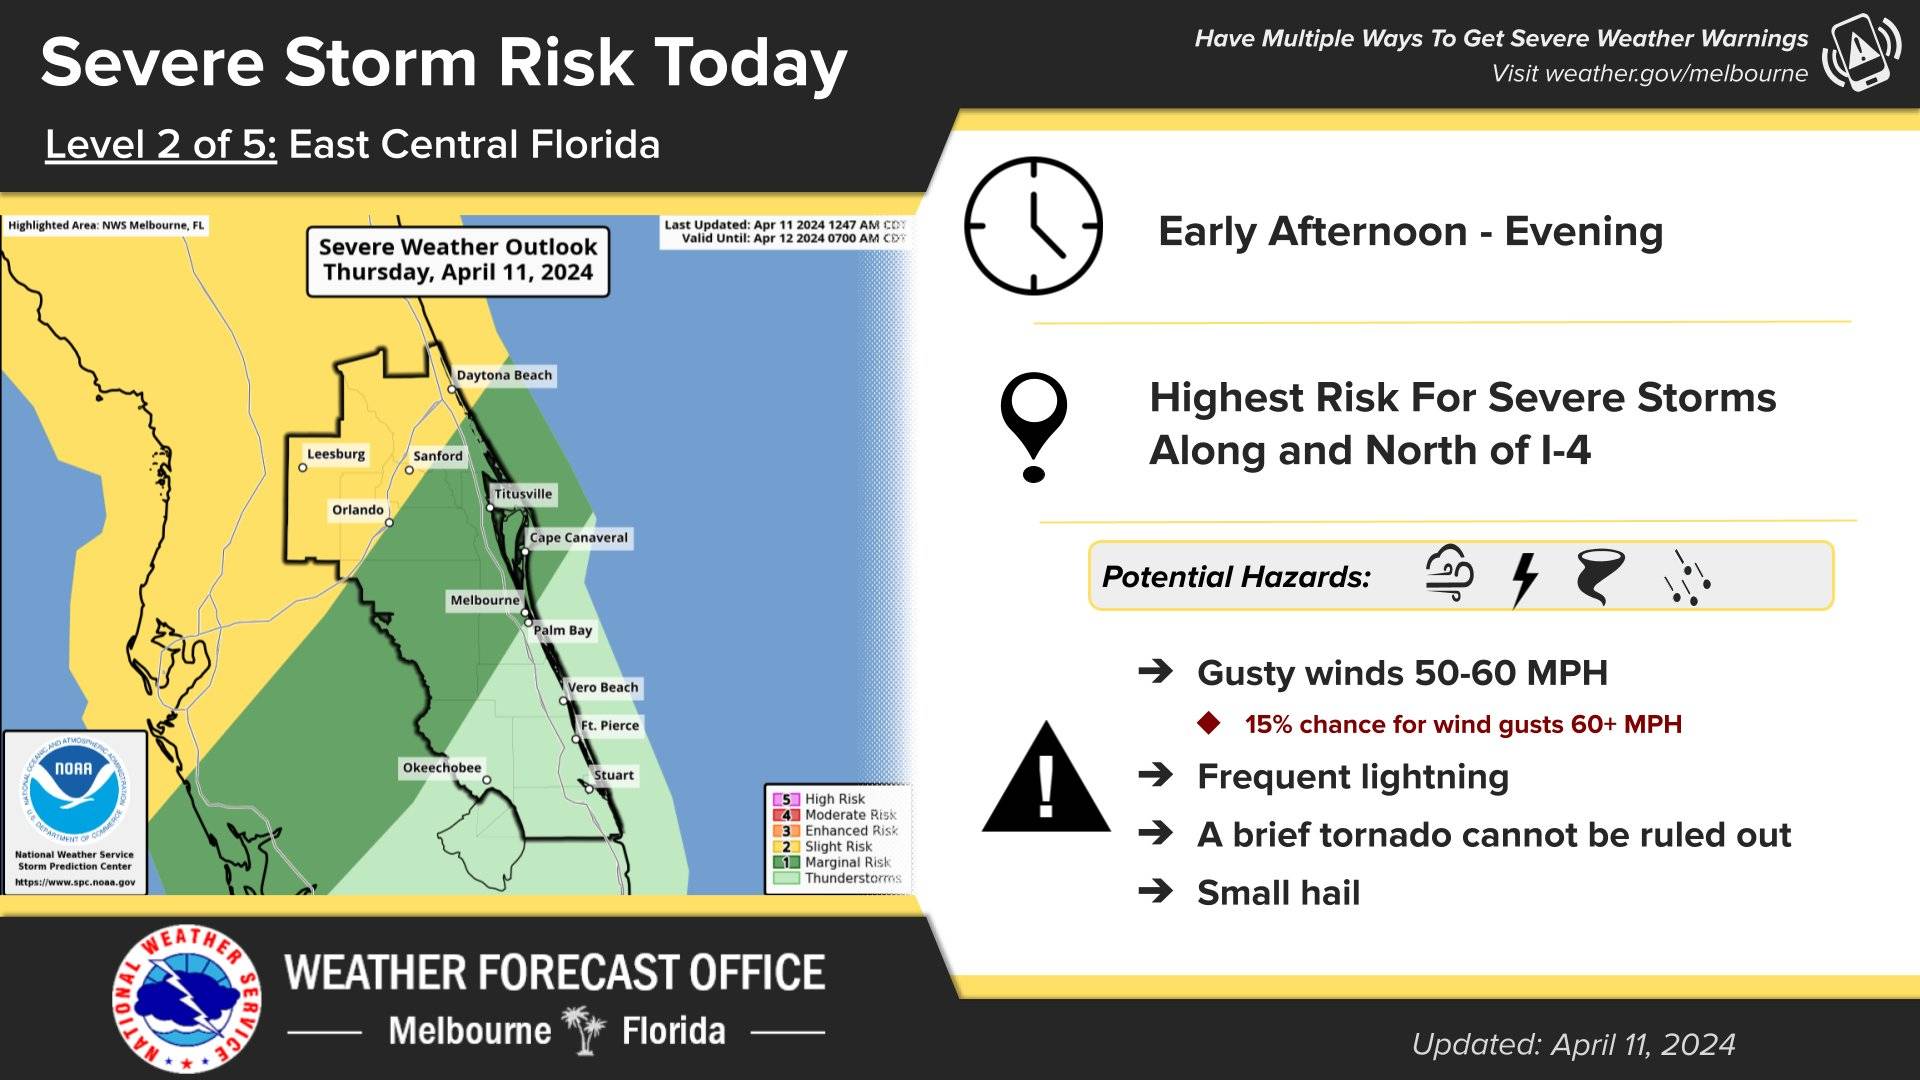 Risk of severe storms for the Walt Disney World theme park areas today